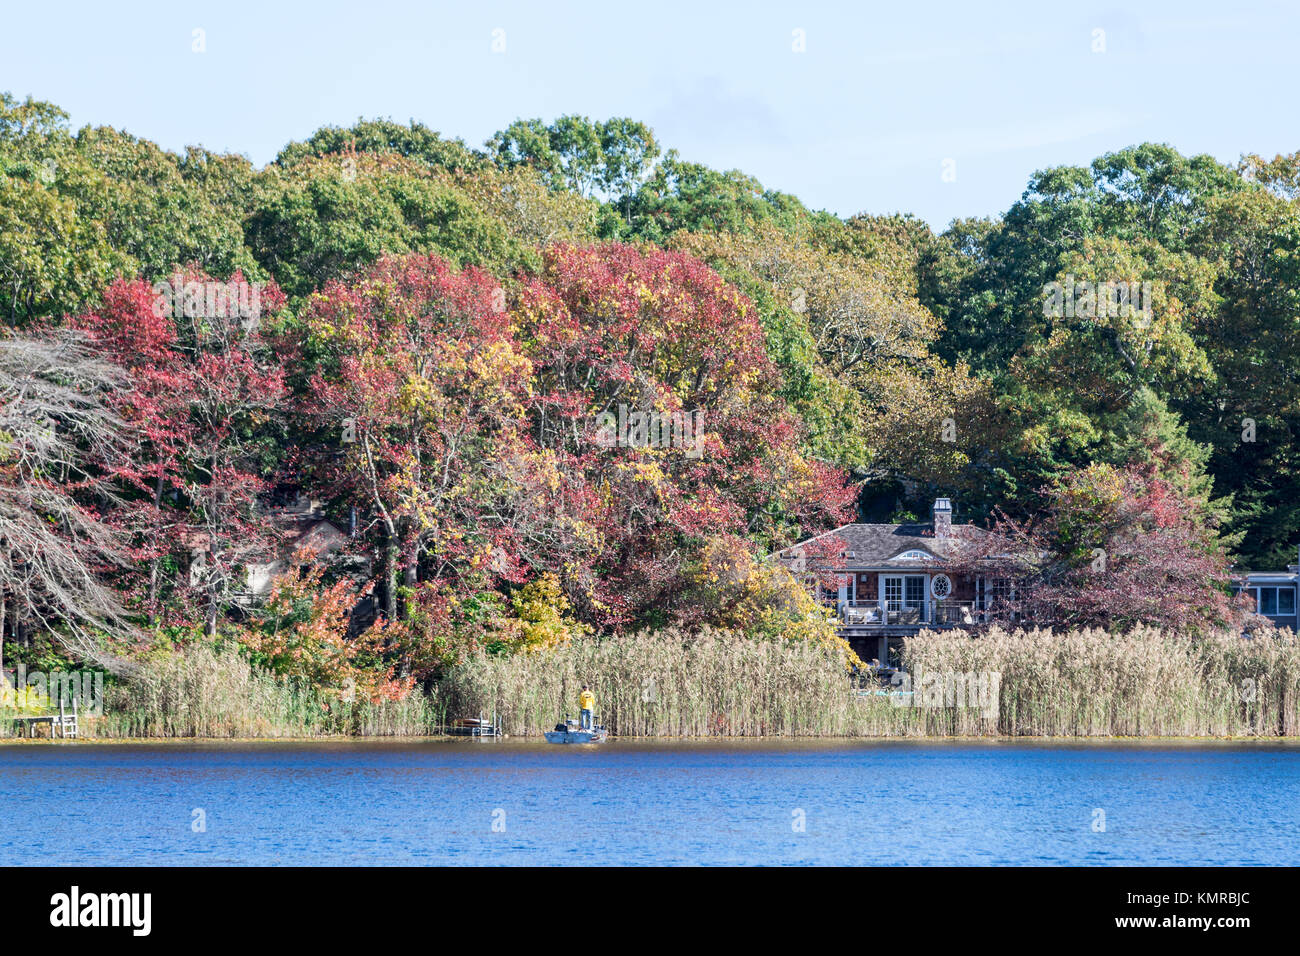 landscape including a little bit of a house and water in southampton, ny Stock Photo